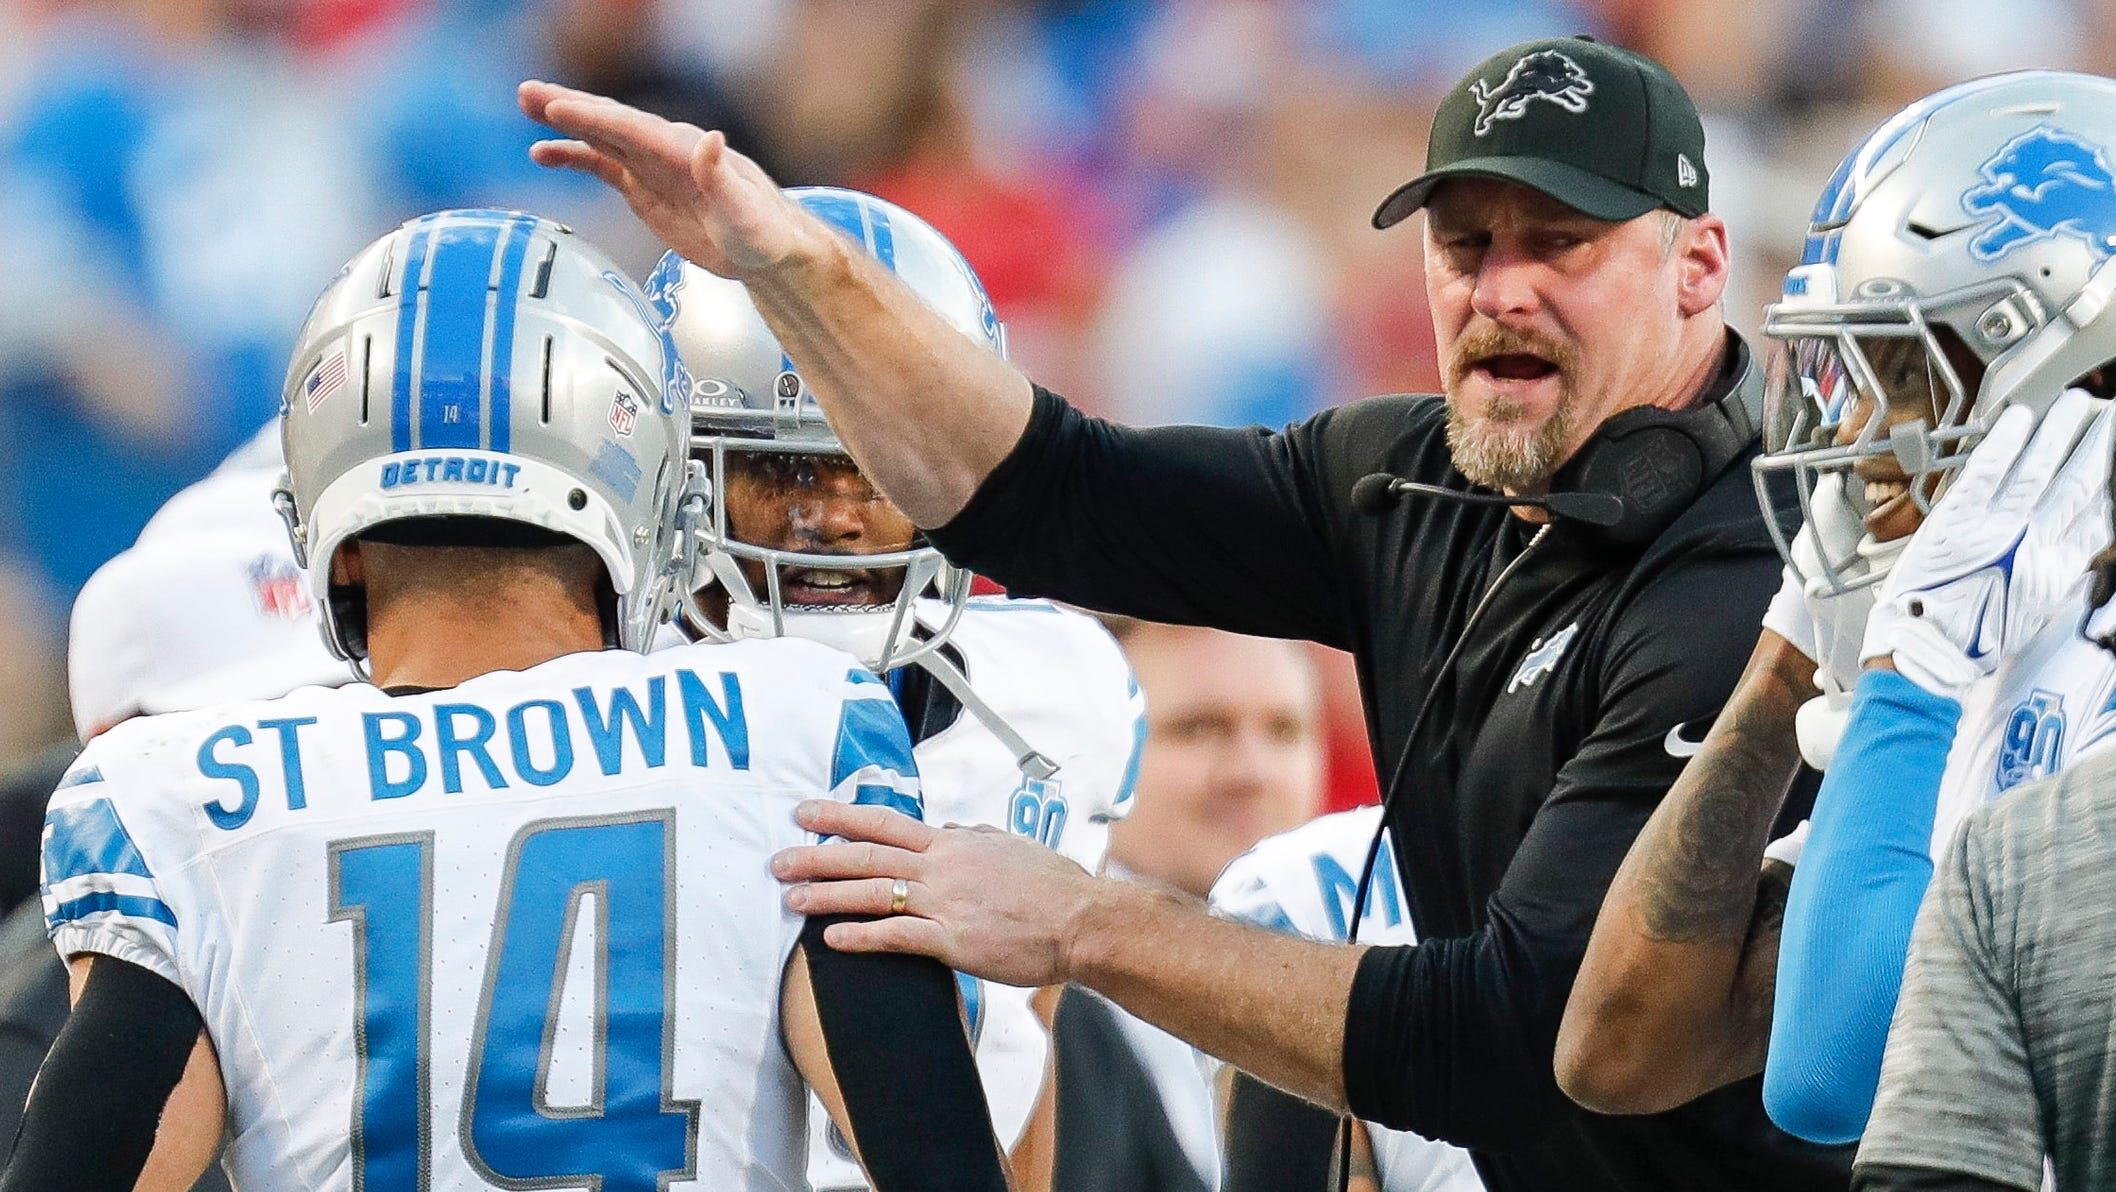 Lions head coach Dan Campbell celebrates a touchdown and welcomes Amon-Ra St. Brown back to the sideline.